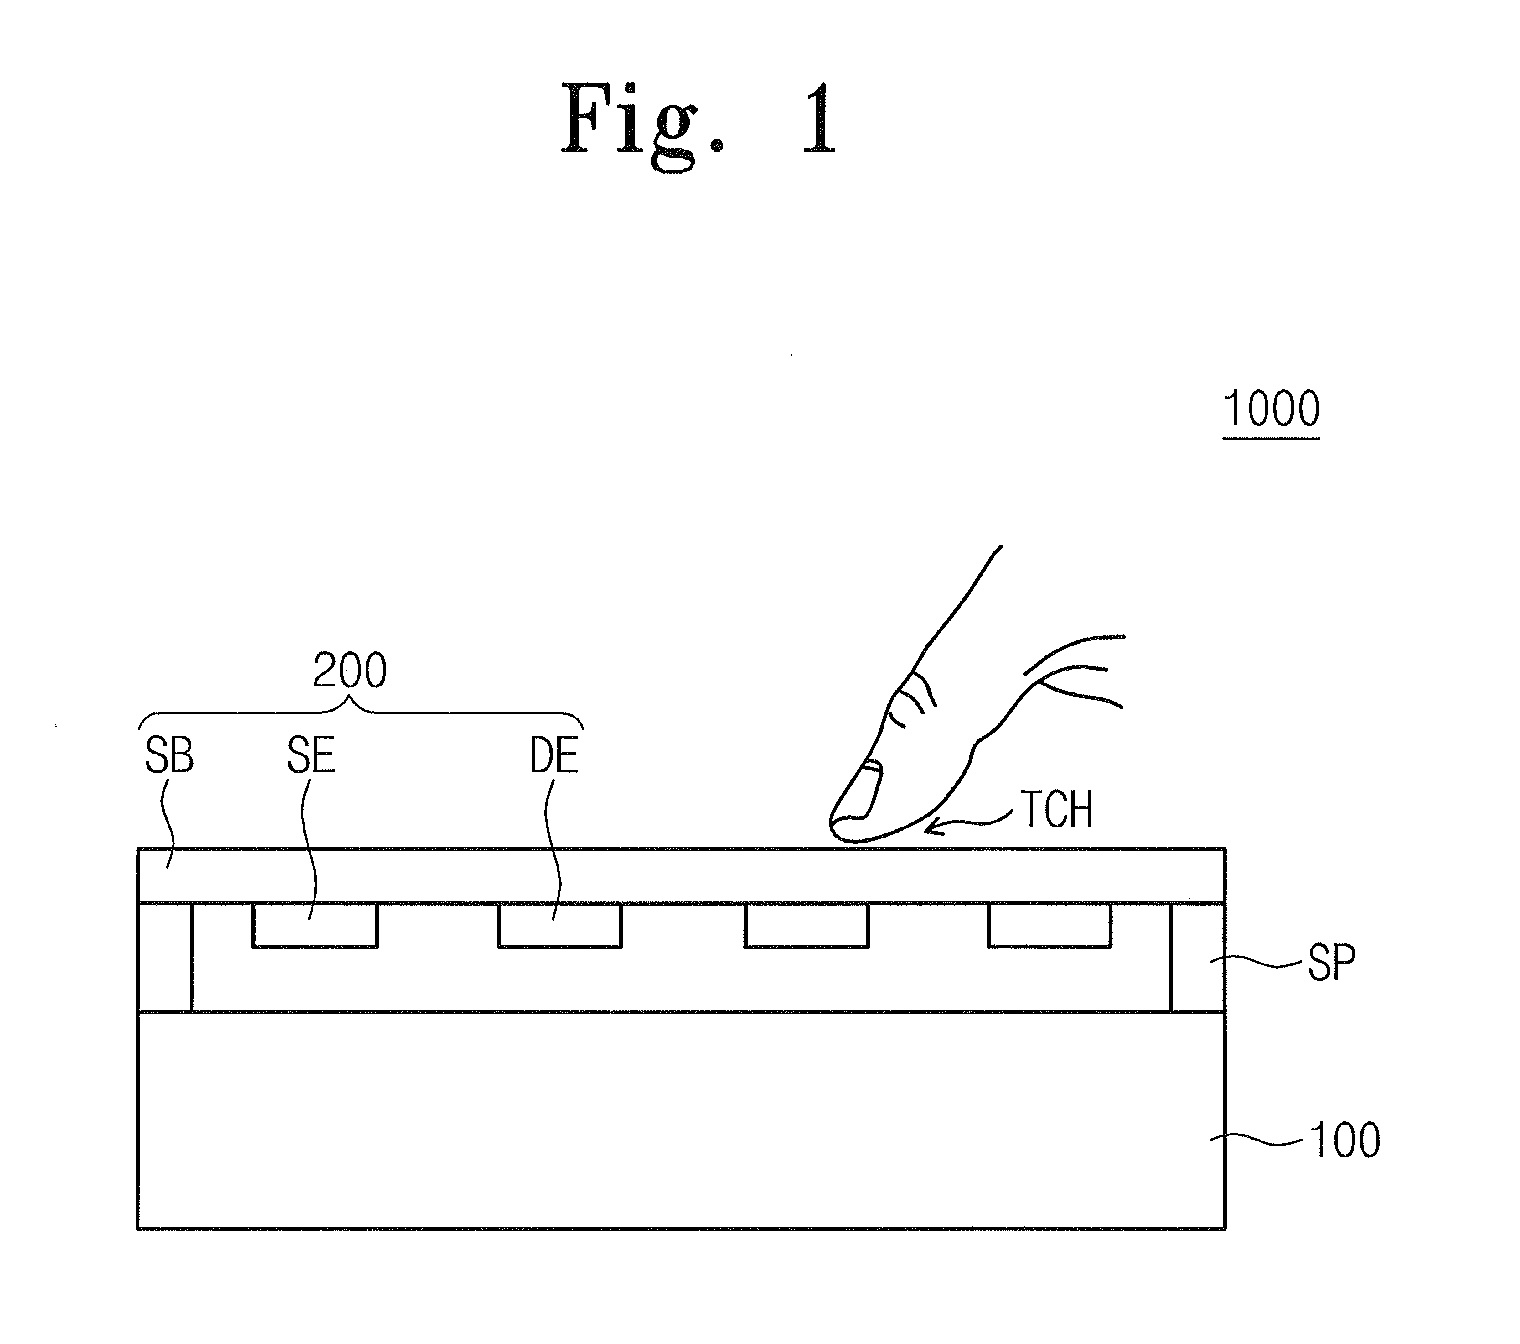 Display apparatus for sensing touch and providing an electro-tactile feeling and a method of driving the same